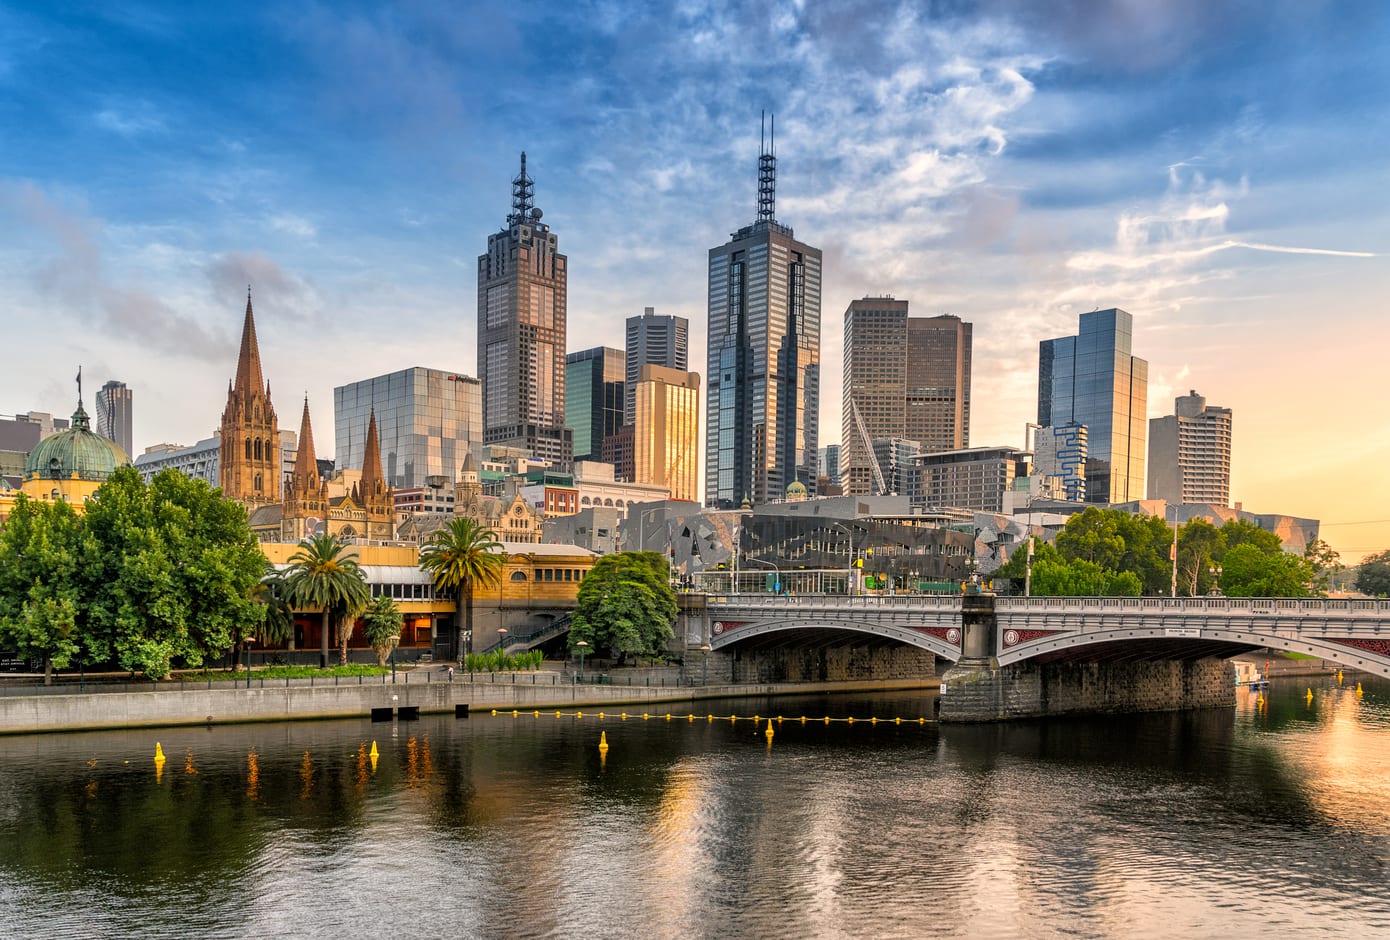 View of Melbourne's skyline at dusk, in Australia.